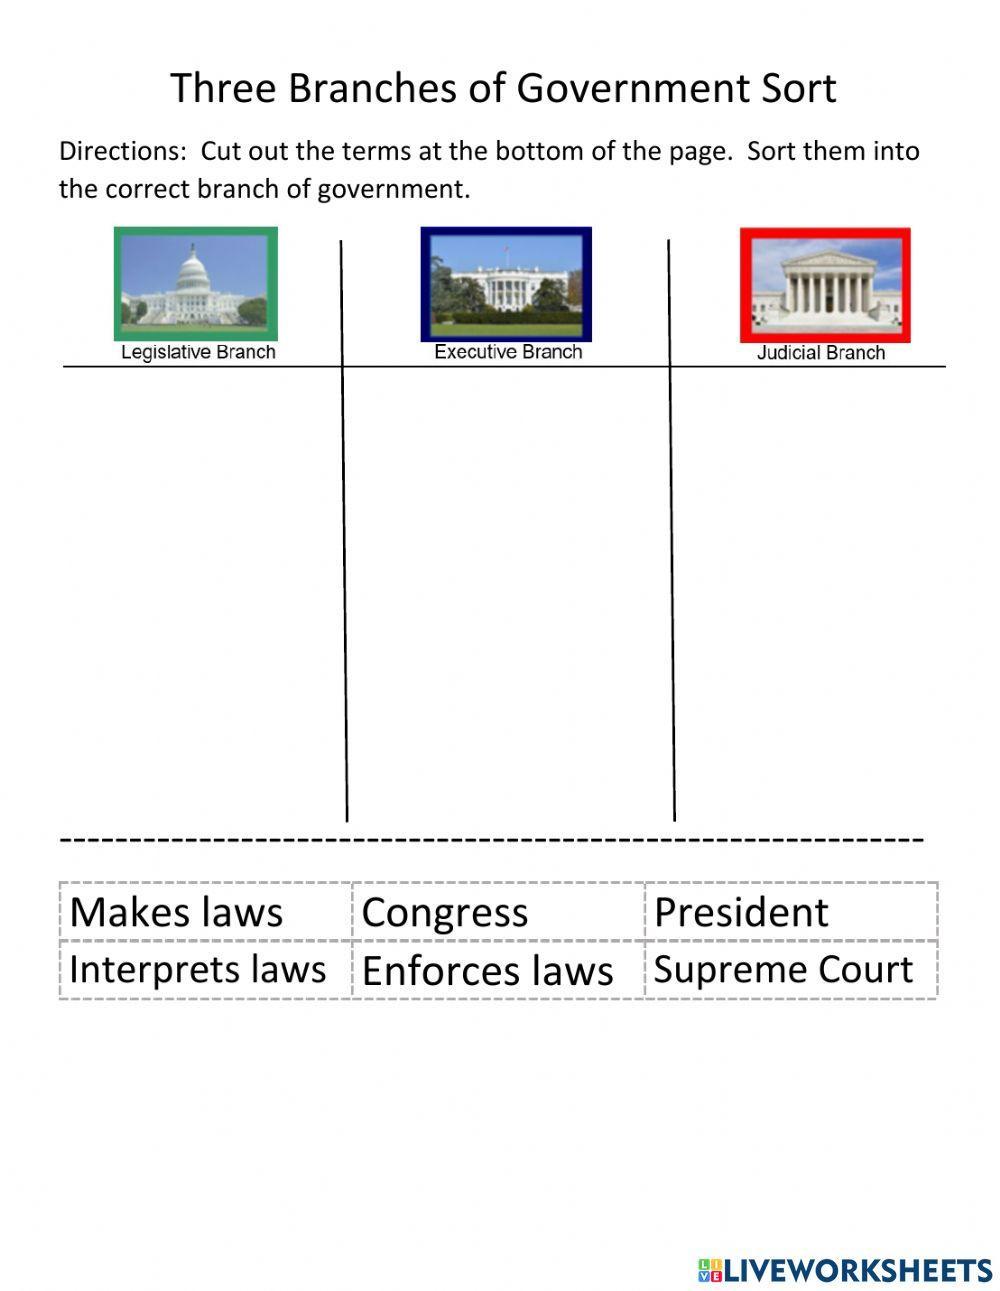 Unit 4B Three Branches of Government Sort